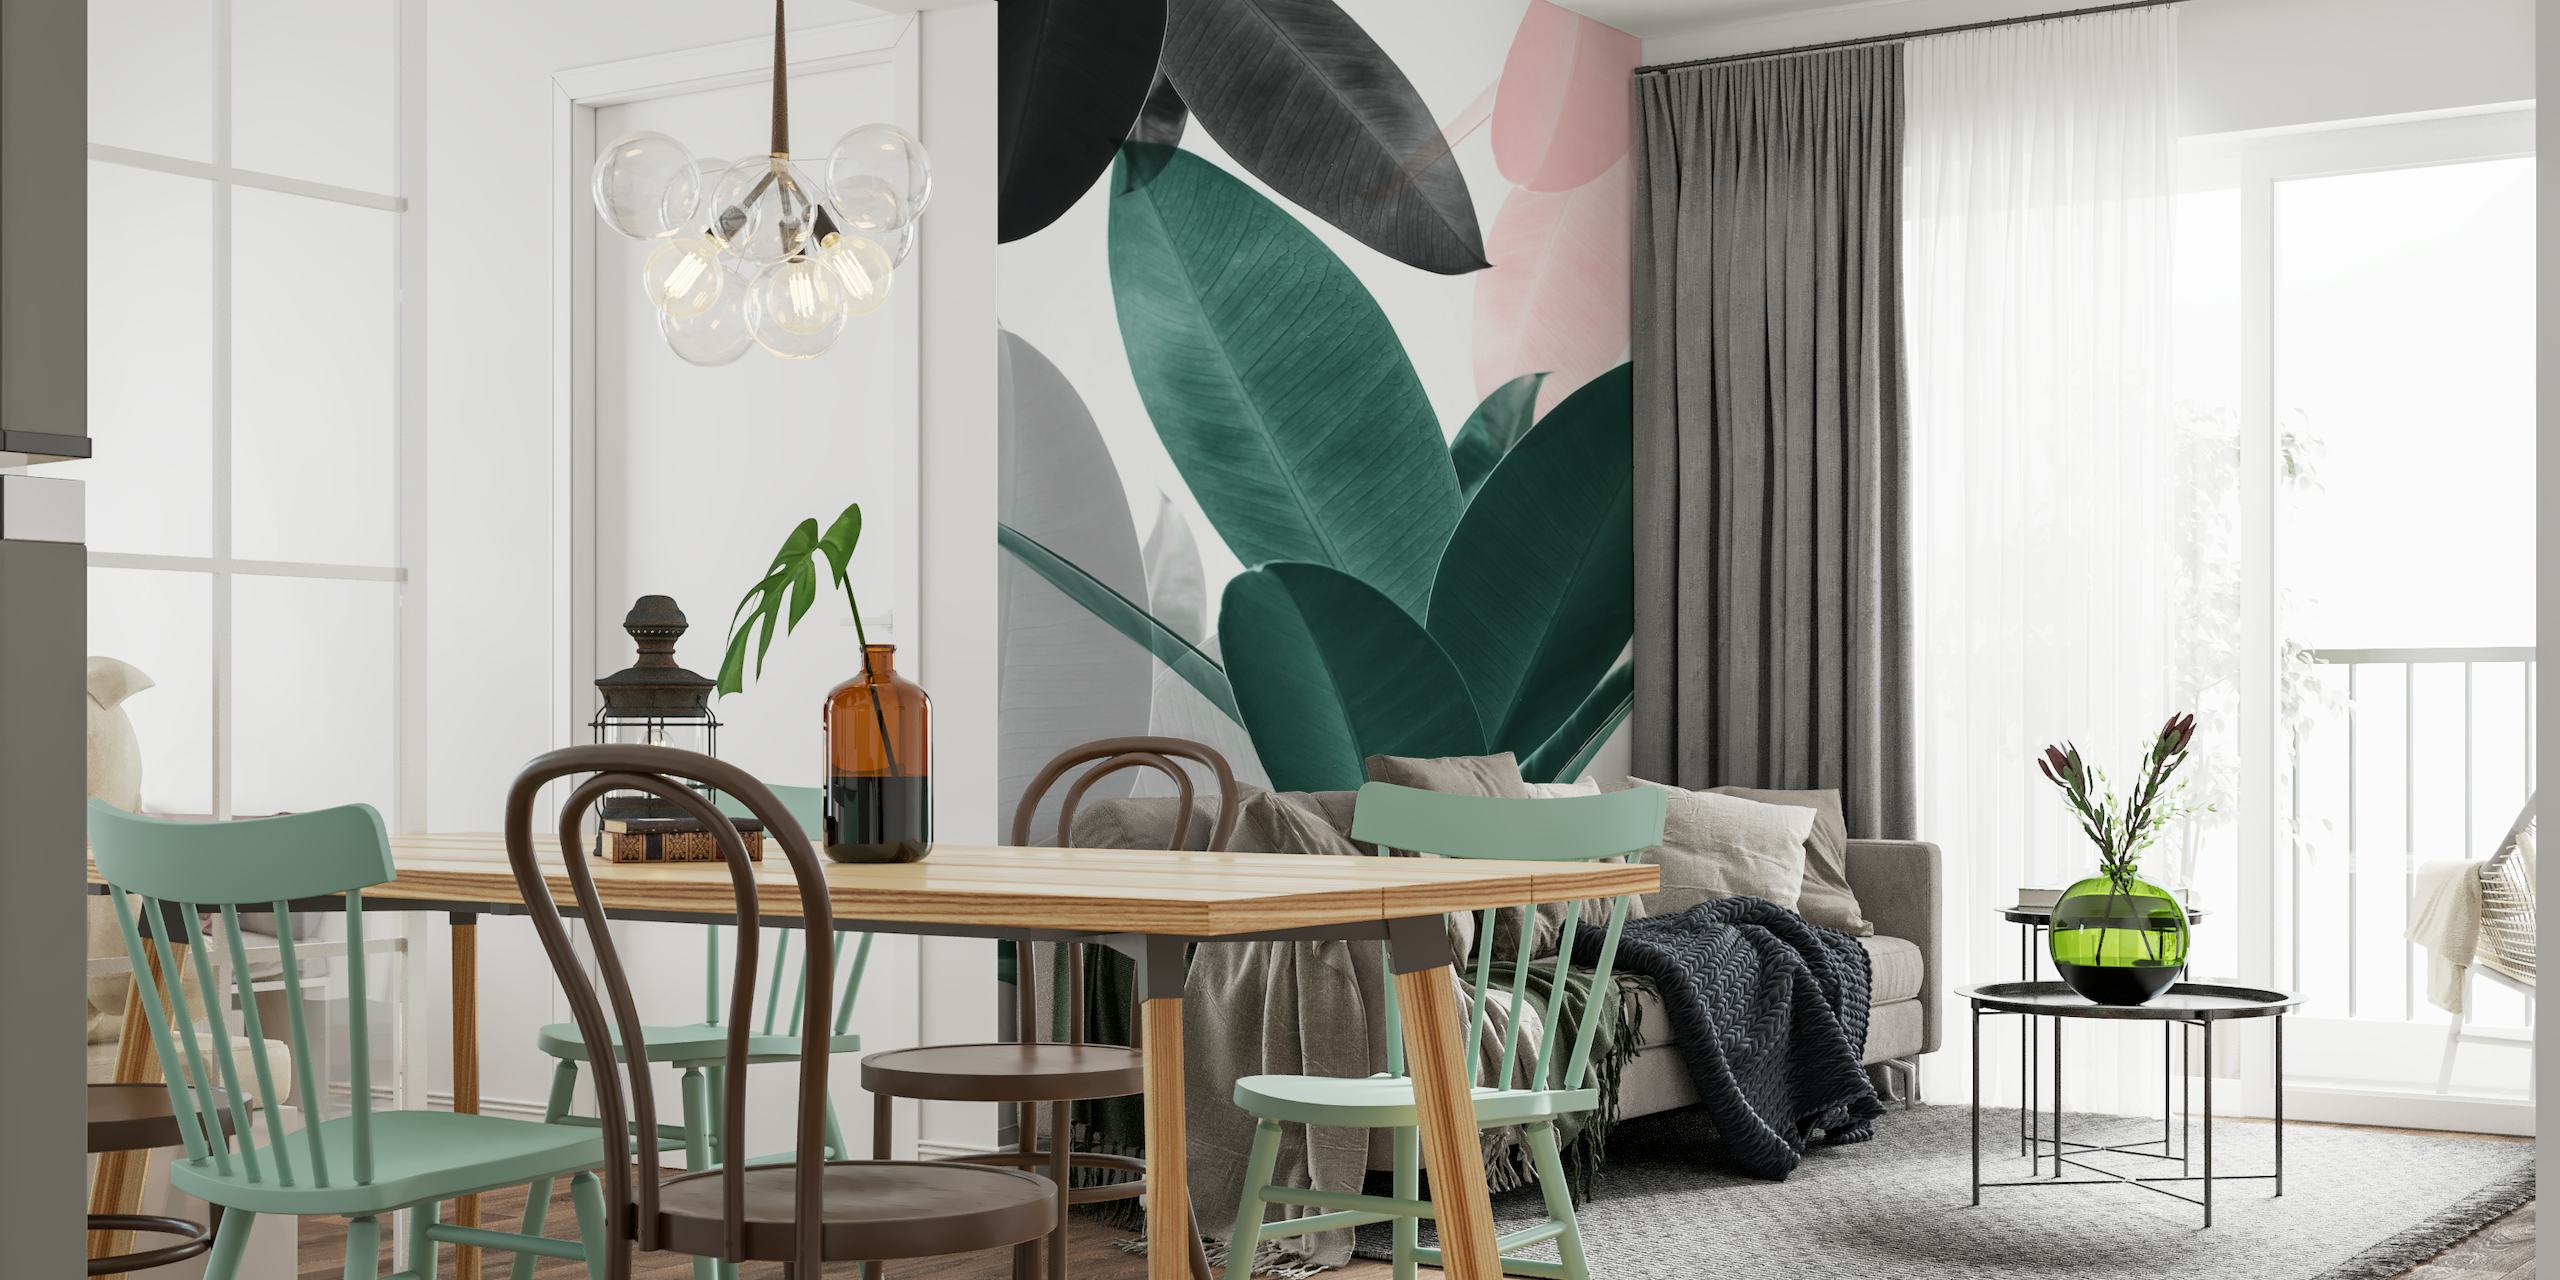 Stylish 'Leaf Play' wall mural with a blend of pink, green, and monochrome leaves